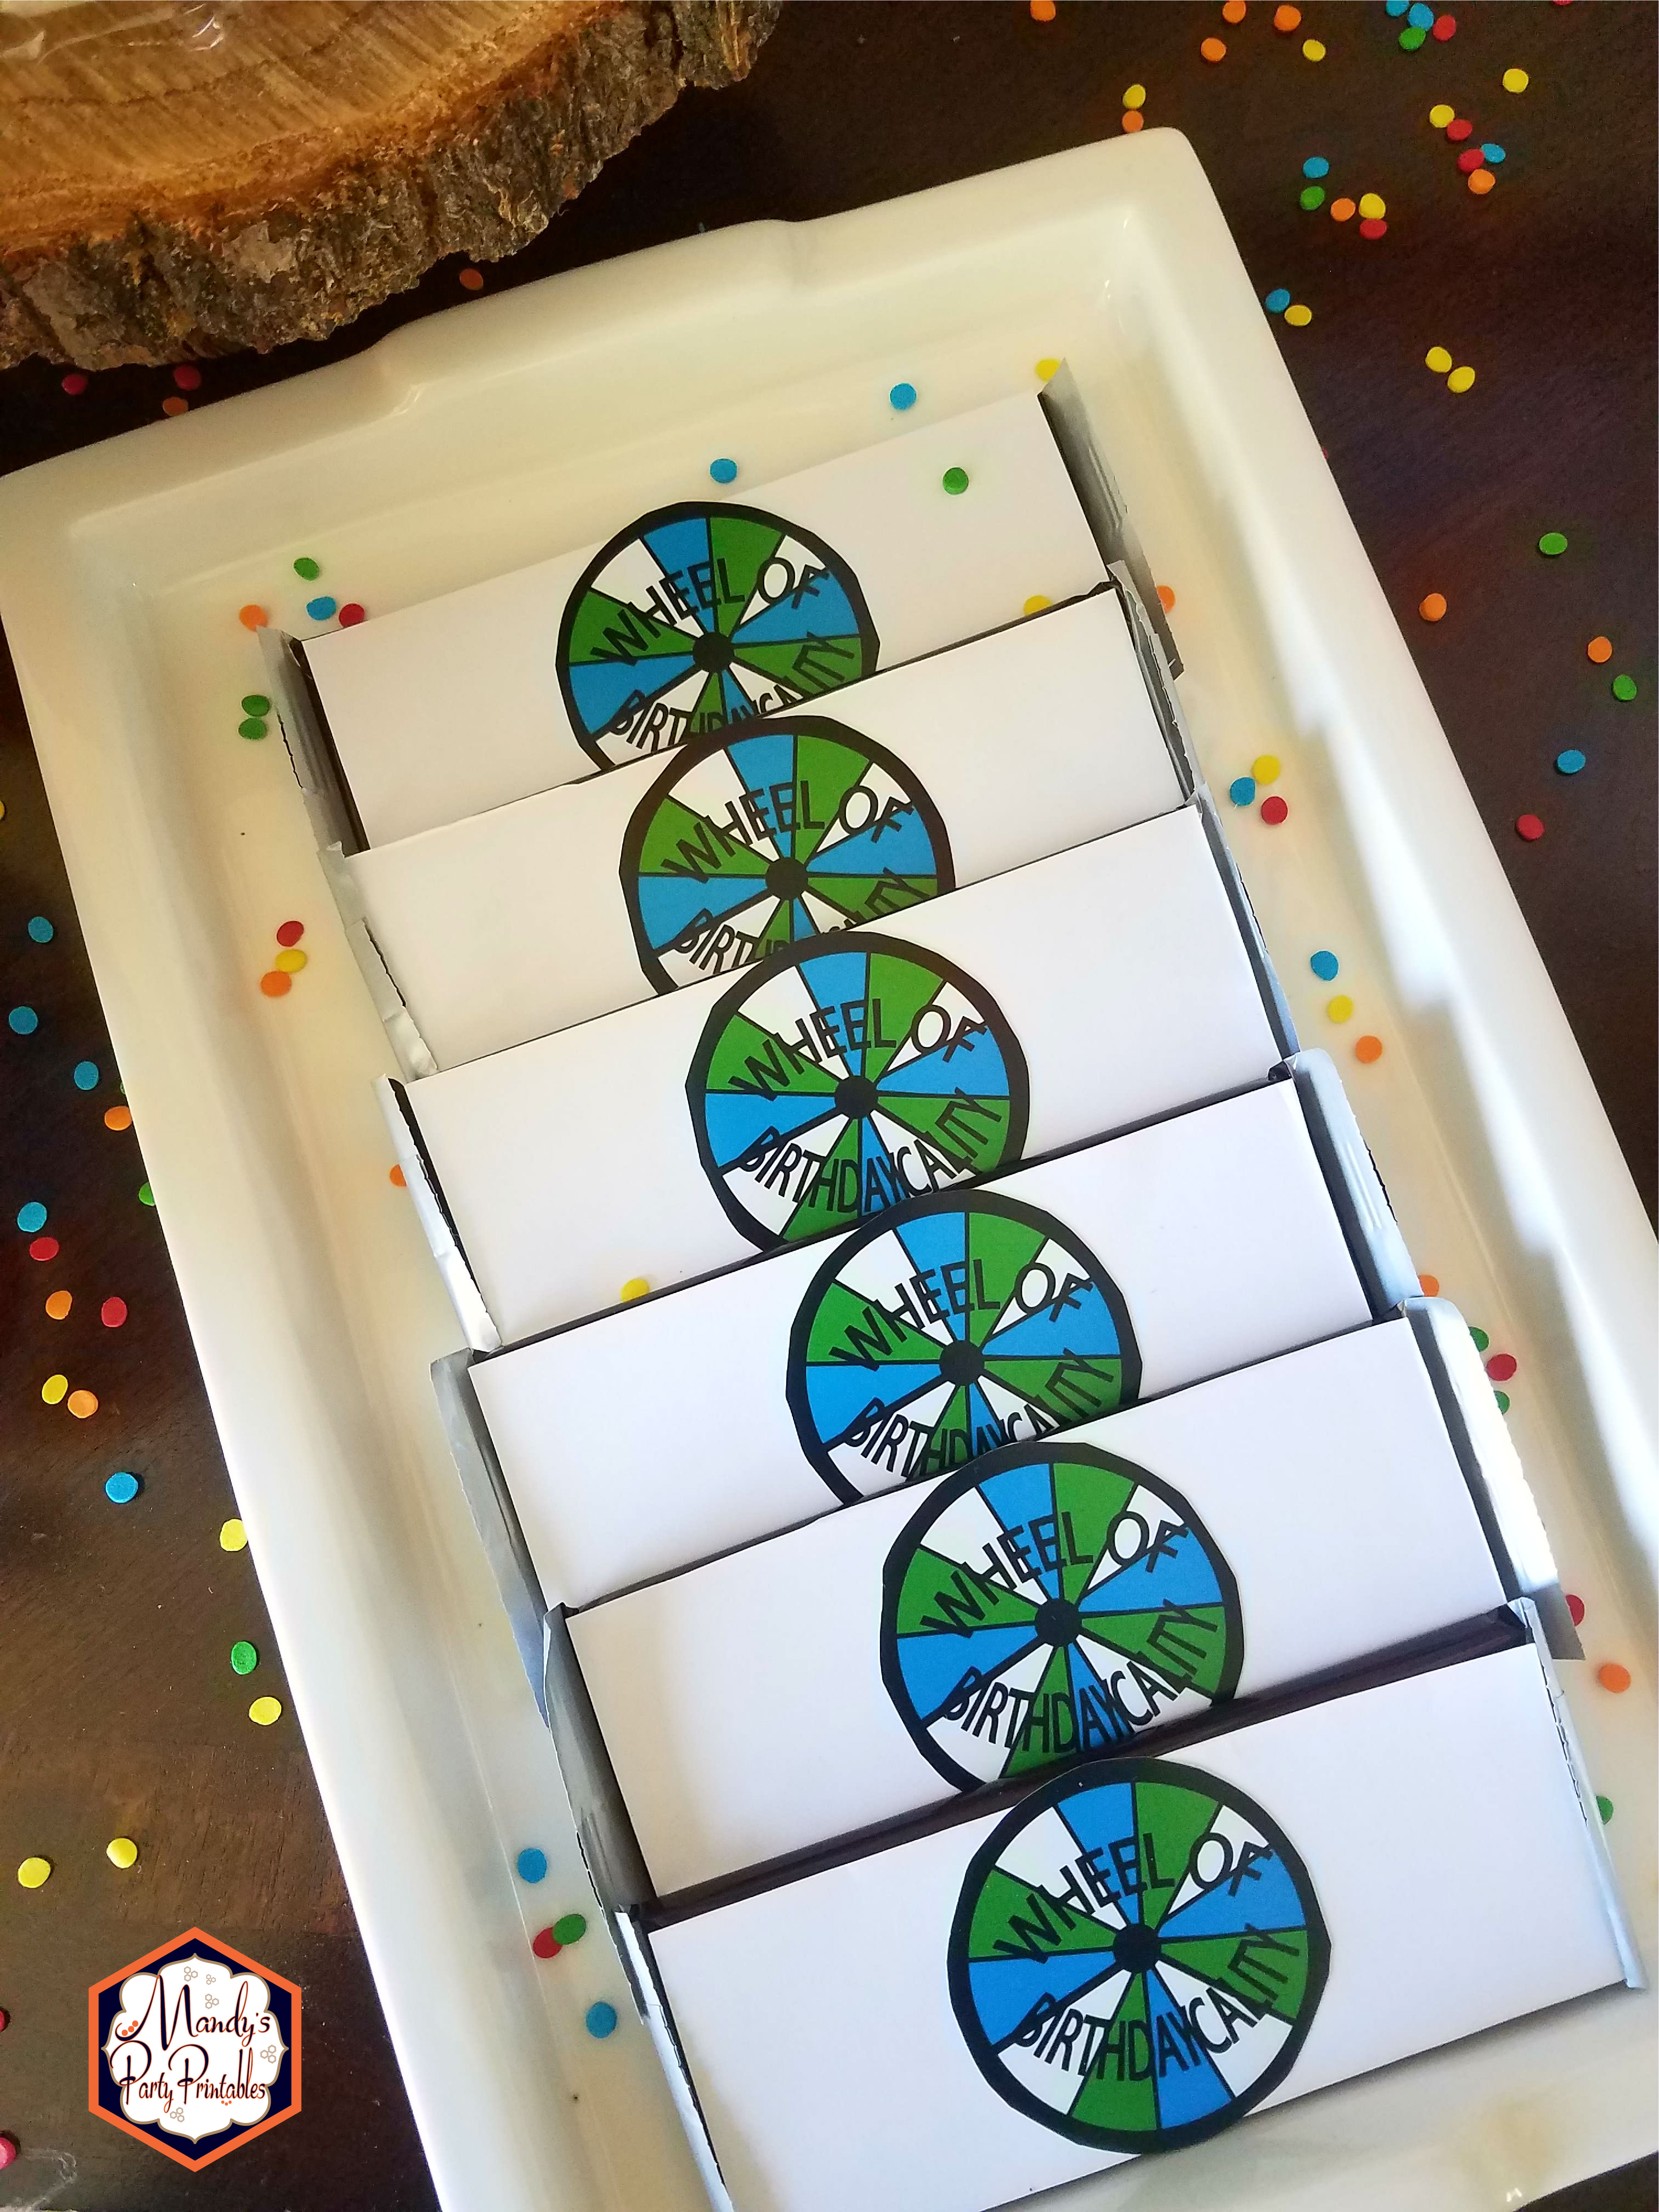 Candy Bar Wrappers Good Mythical Morning Inspired Birthday Party via Mandy's Party Printables